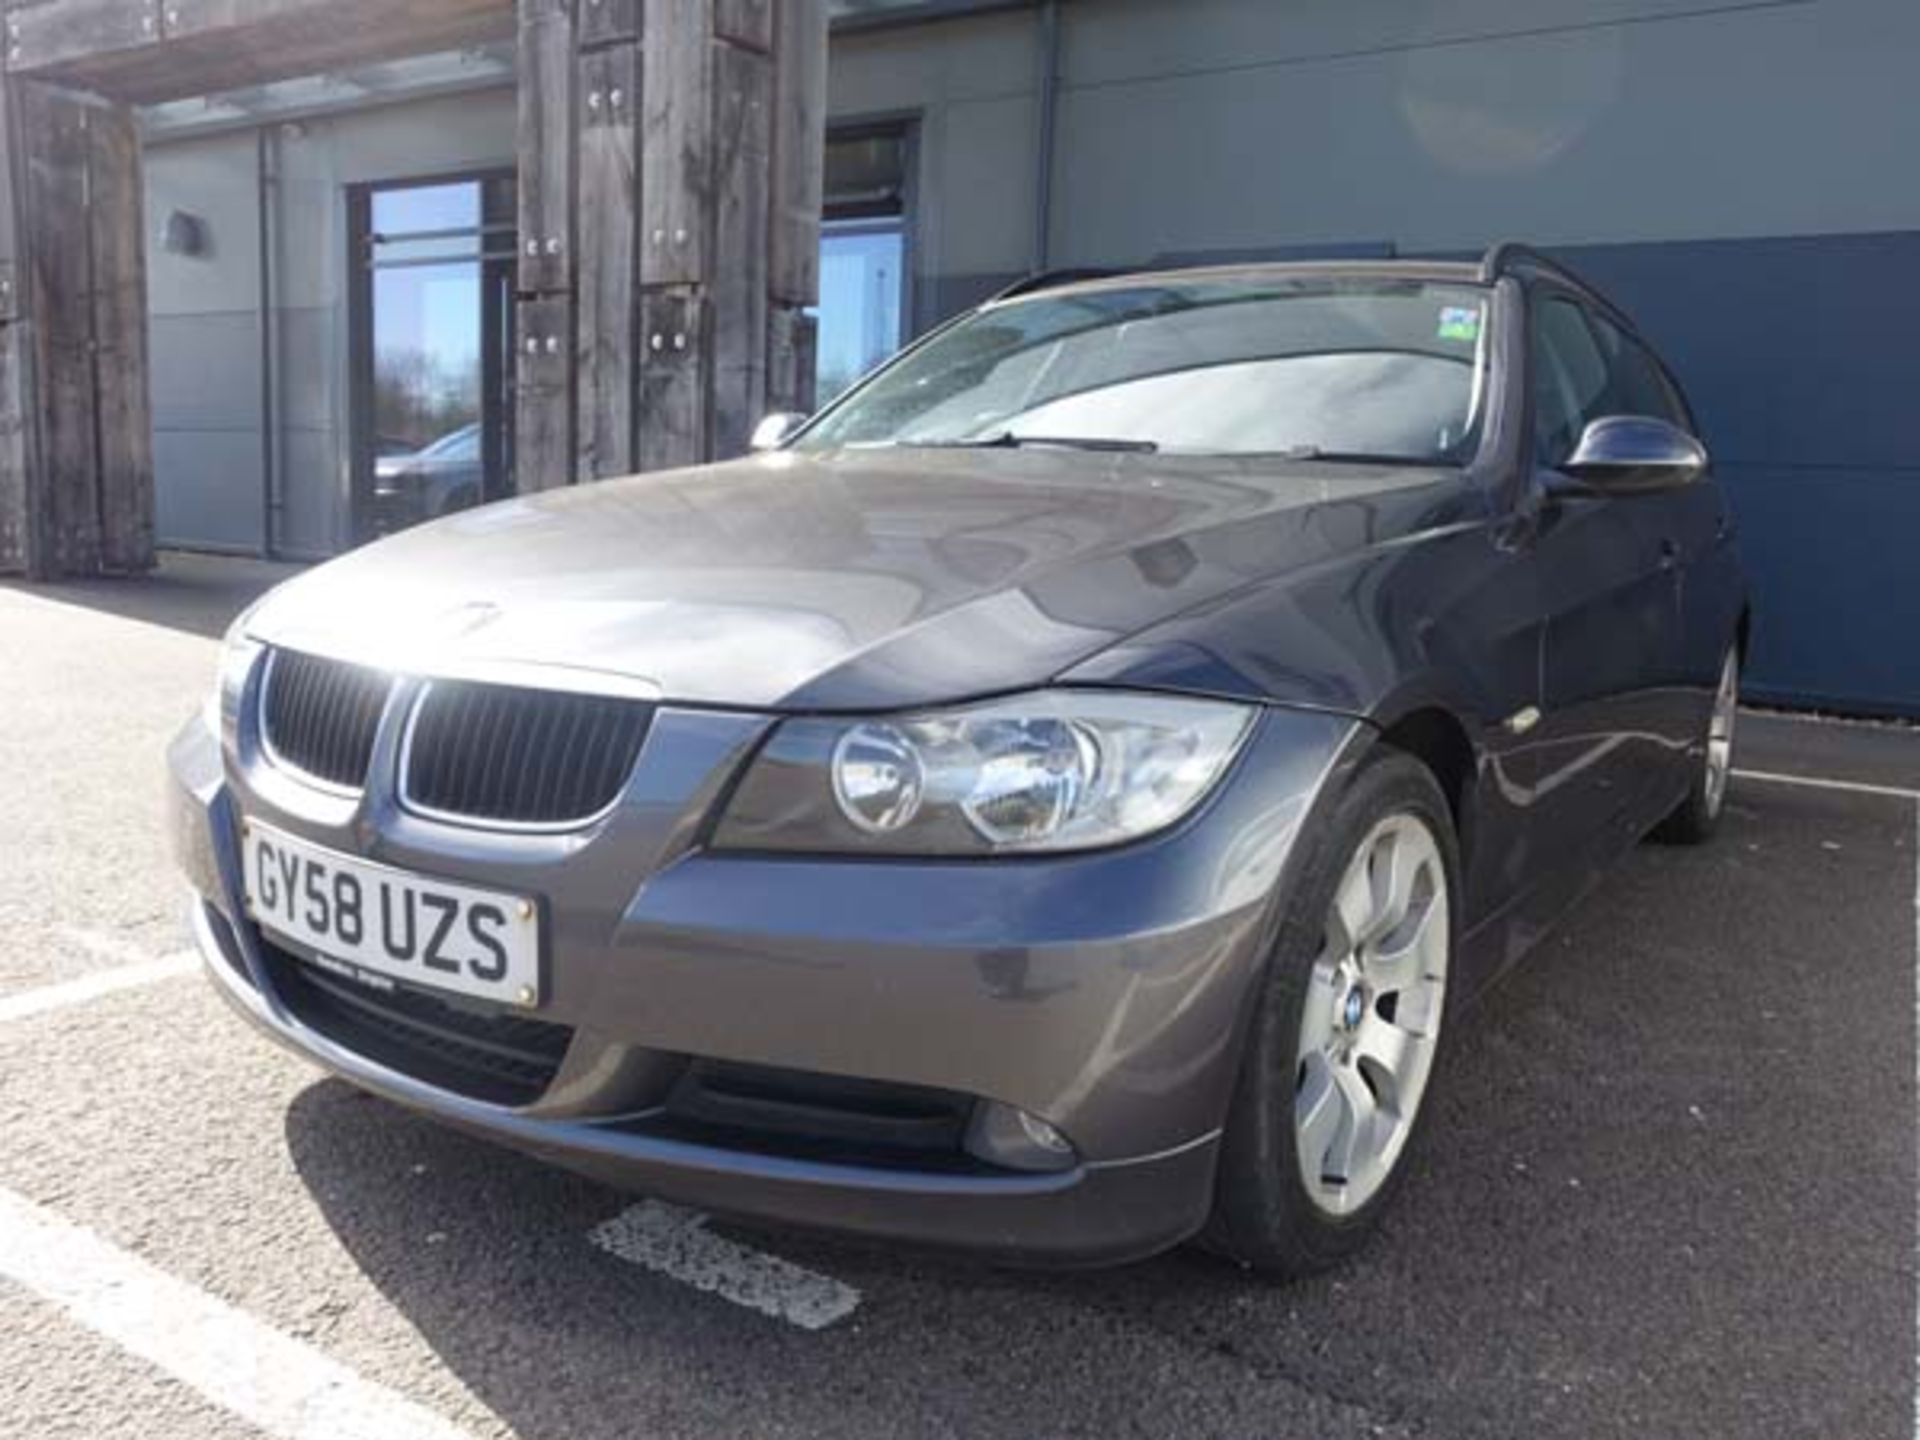 GY58 UZS (2008) BMW 3181 SE Touring, 1995cc diesel in grey MOT: 7/12/21 Notes: heated seats, air